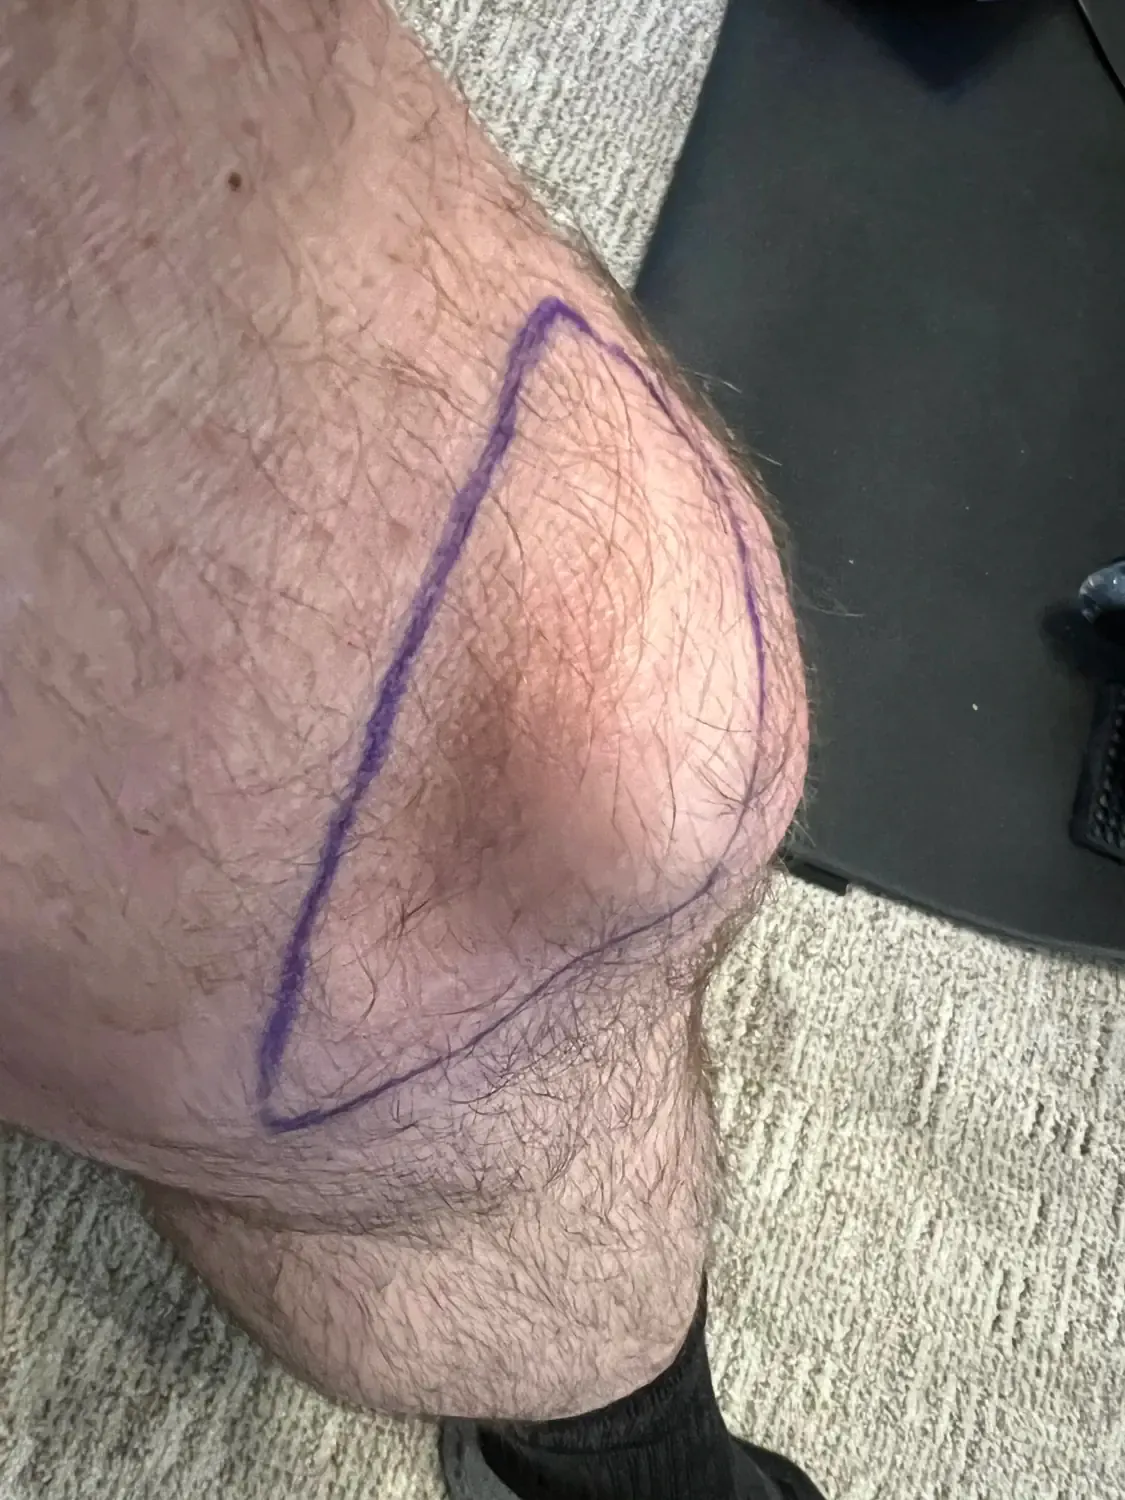 Keith received a shockwave treatment on the highlighted area of his knee to treat the sprained ligament.